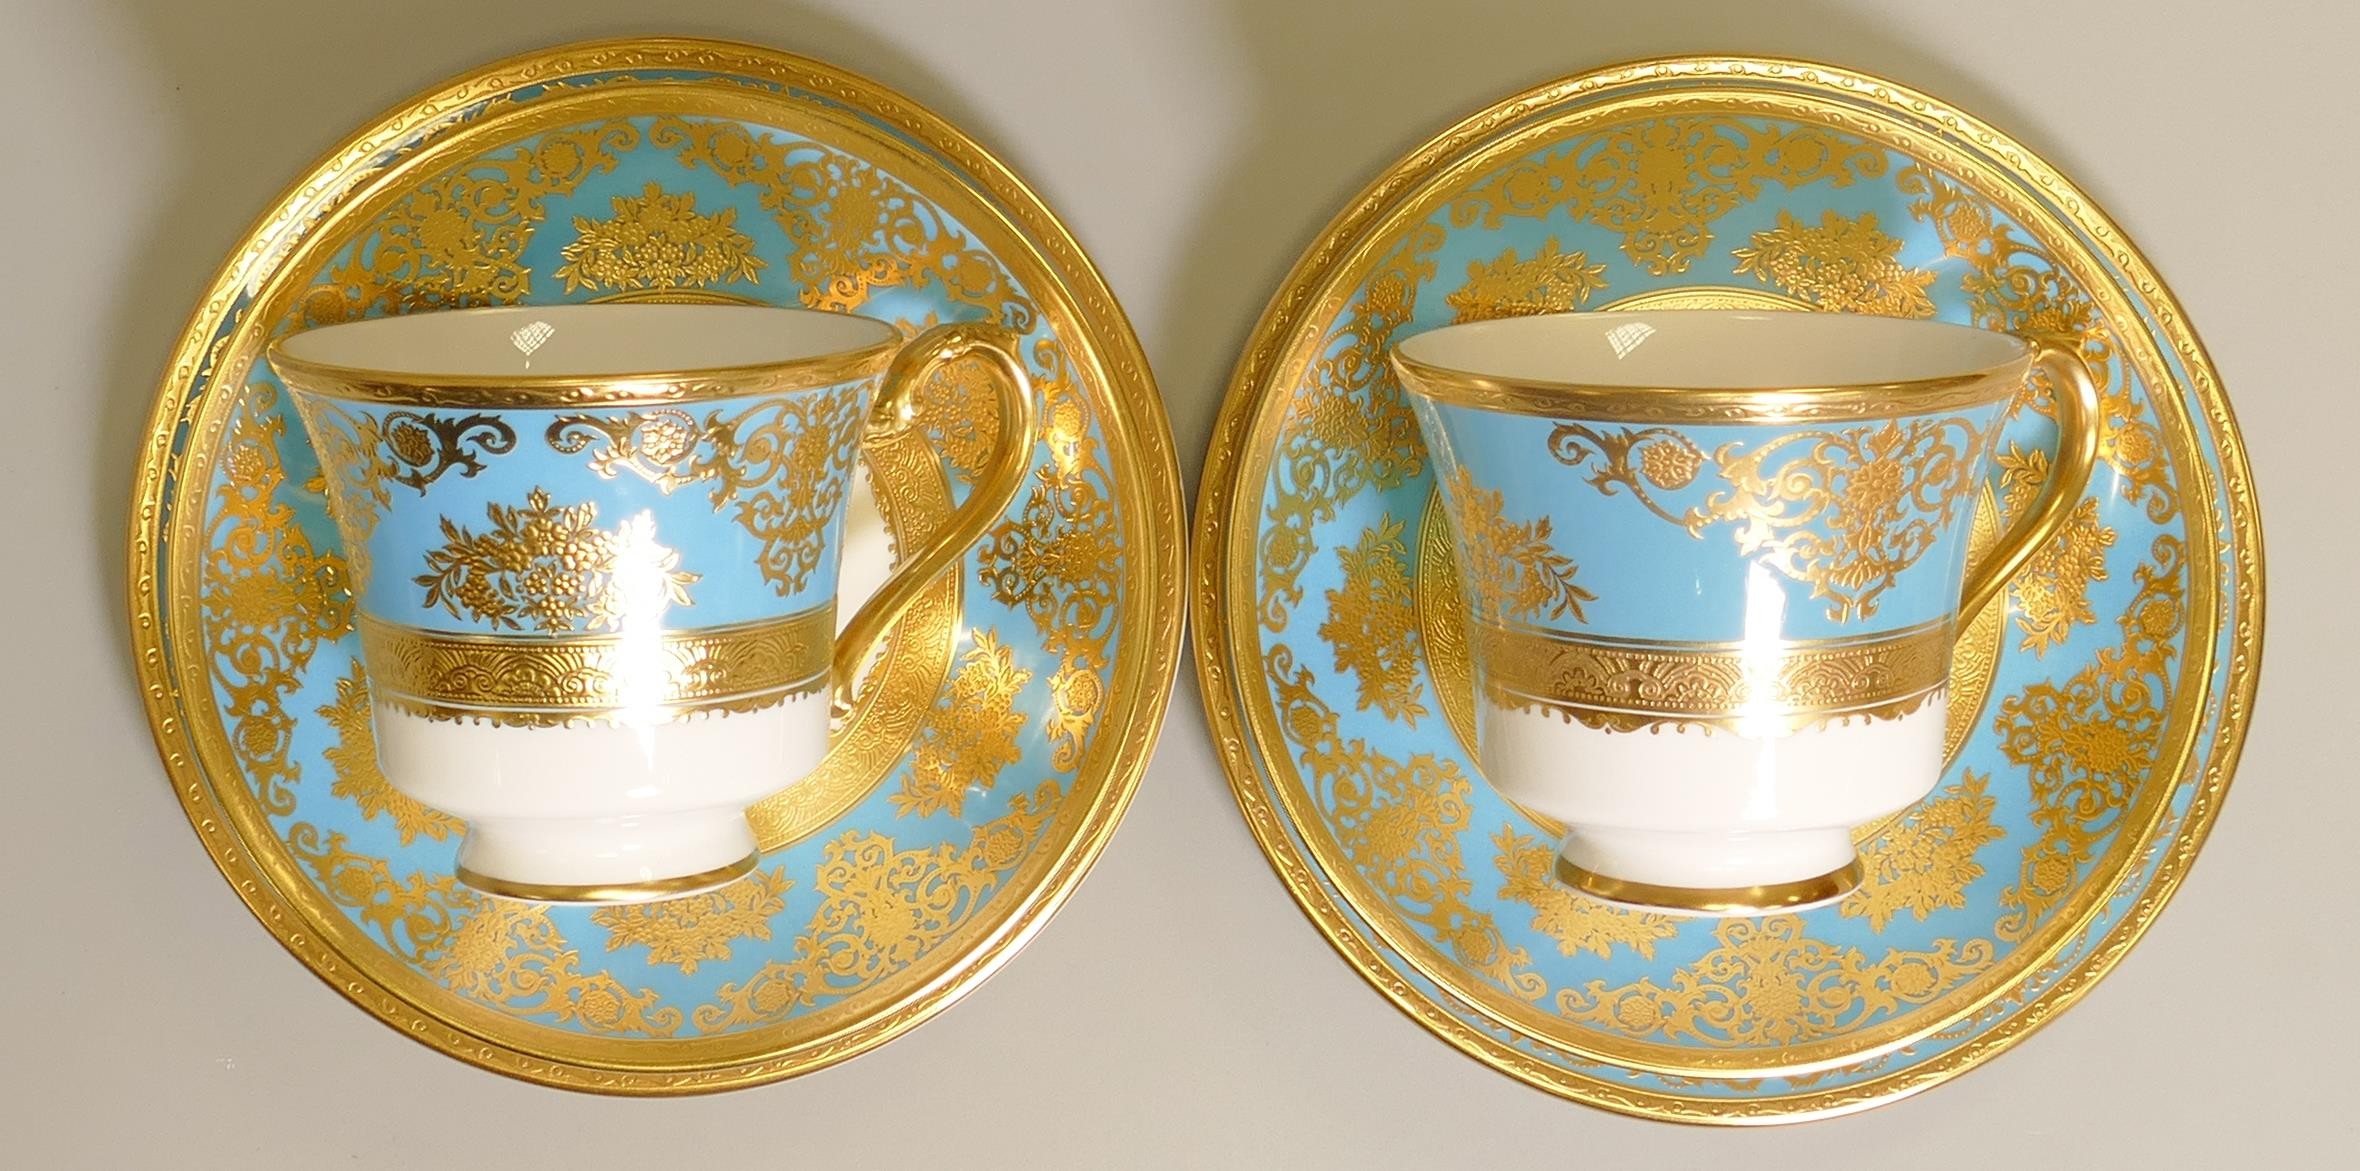 De Lamerie Fine Bone China heavily gilded Turquoise Exotic Garden patterned trios, specially made - Image 3 of 3